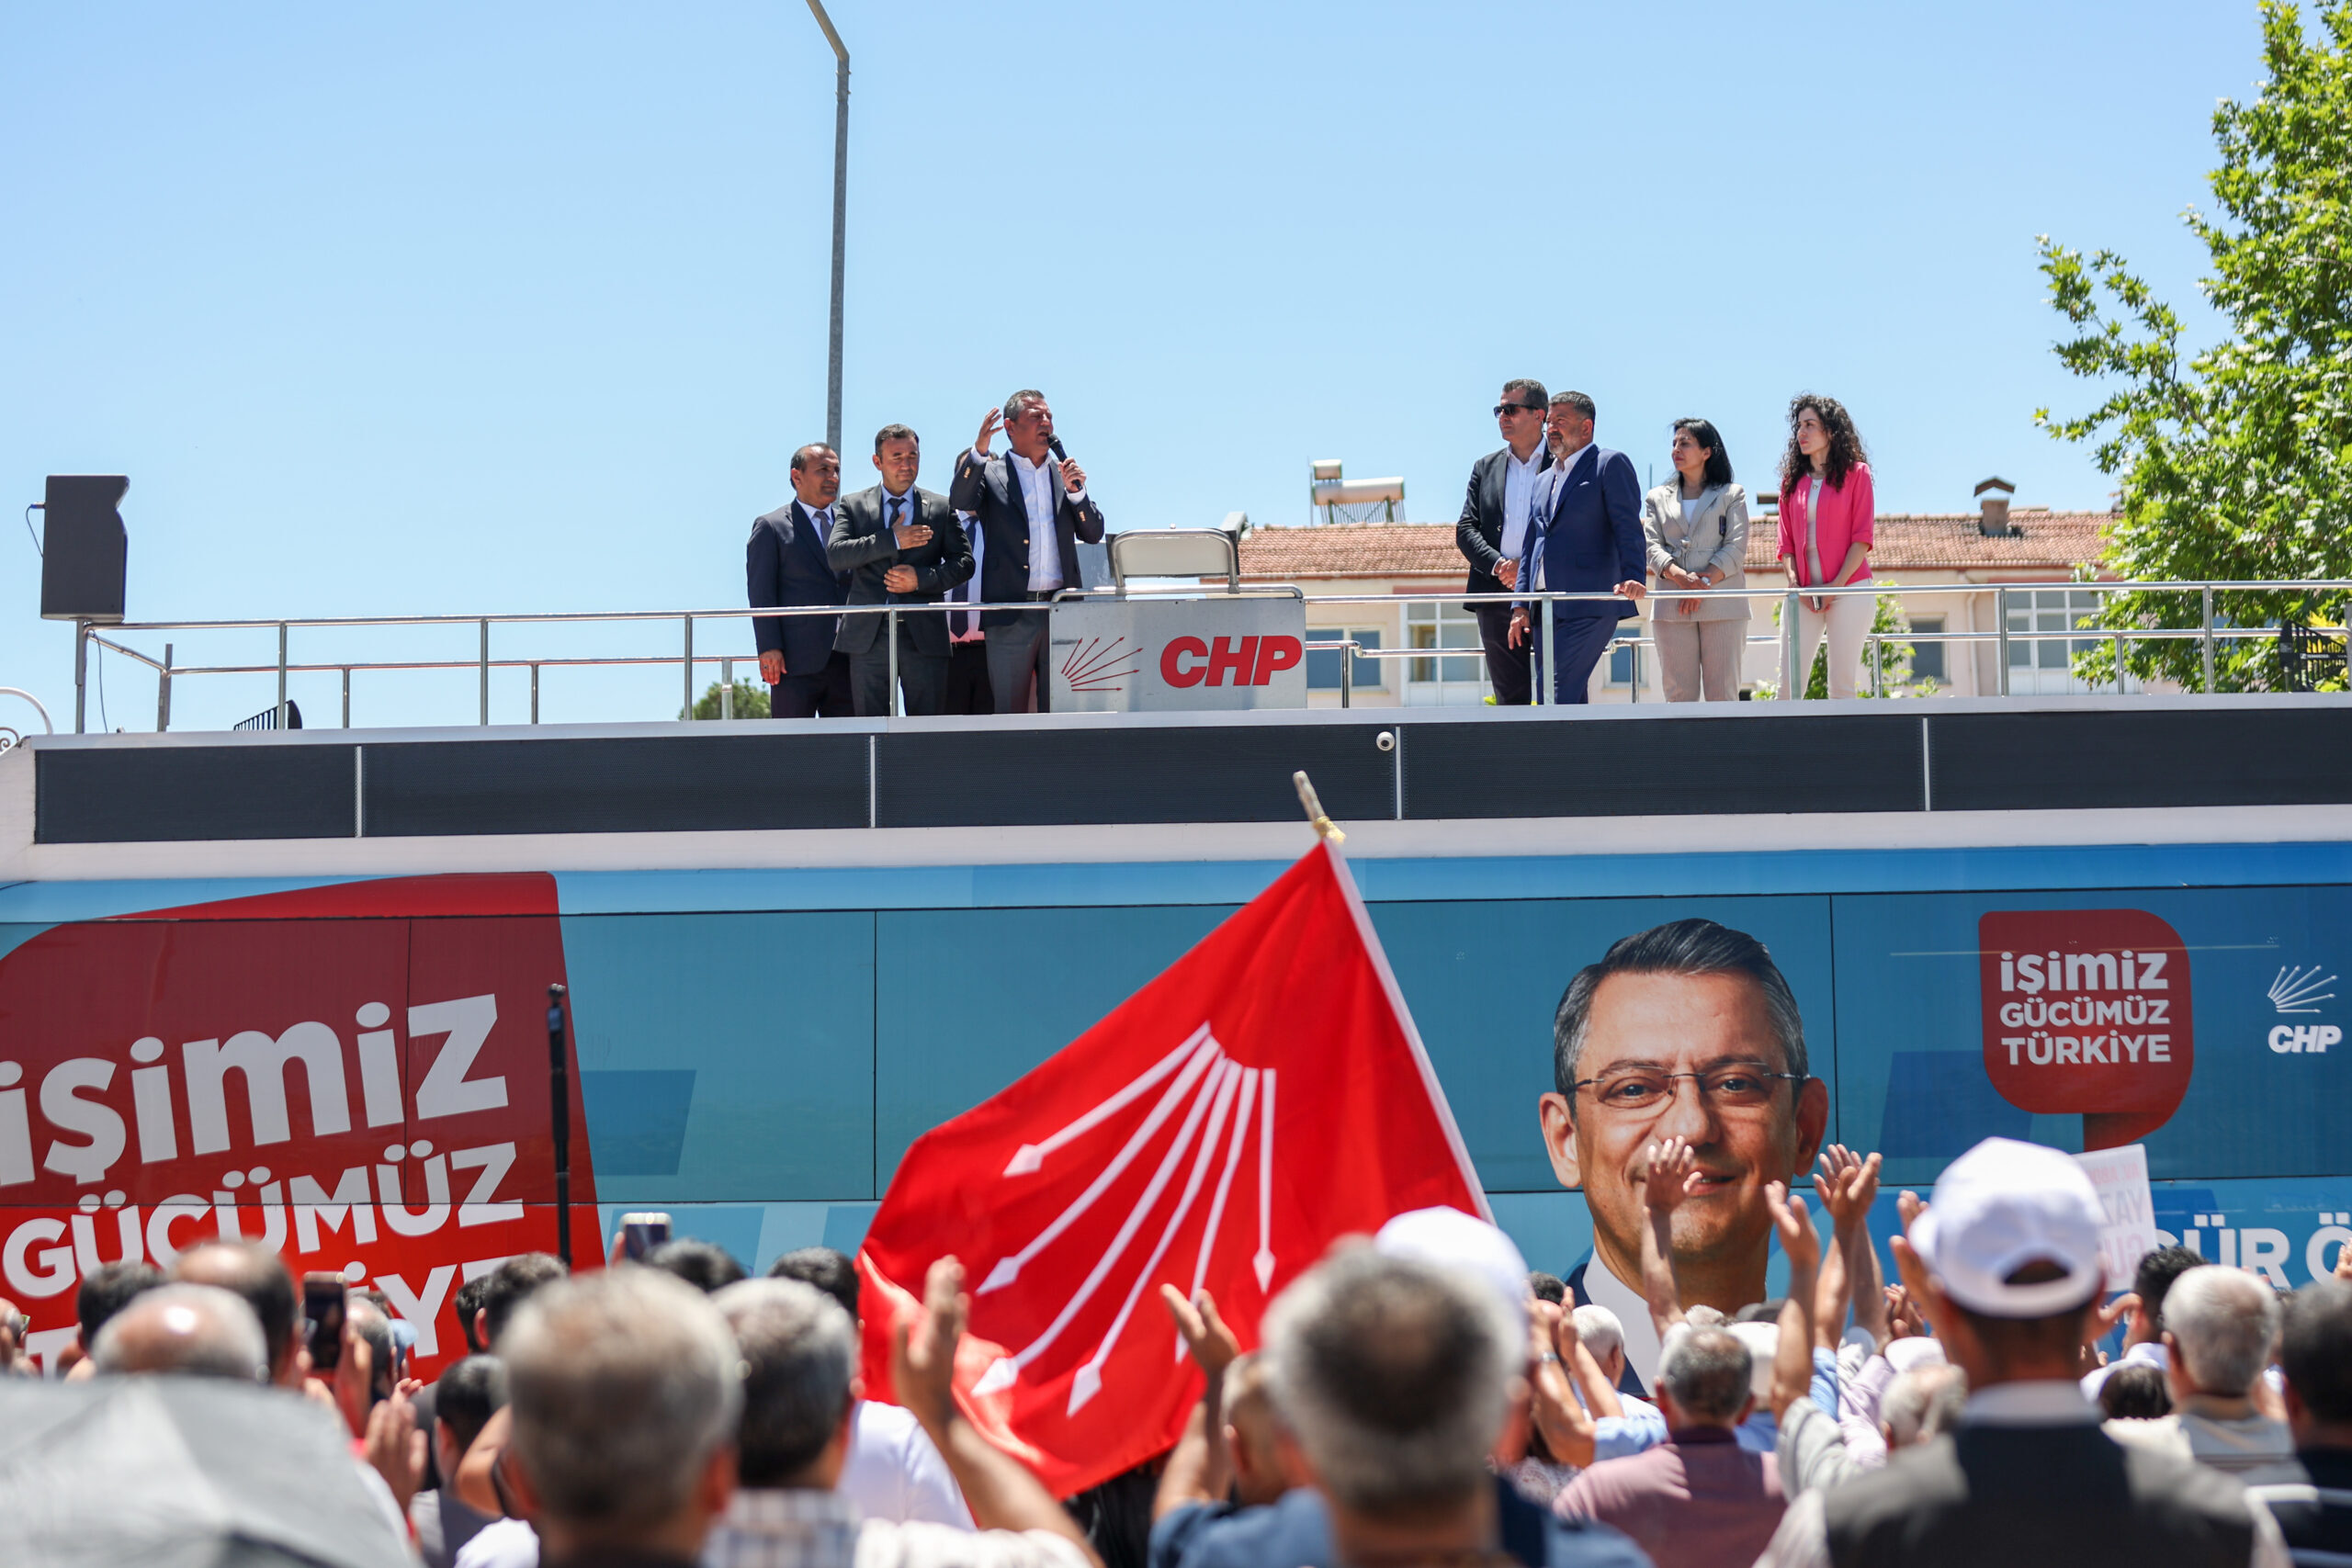 Main opposition leader Ozel pressures ruling AK Party on minimum wage